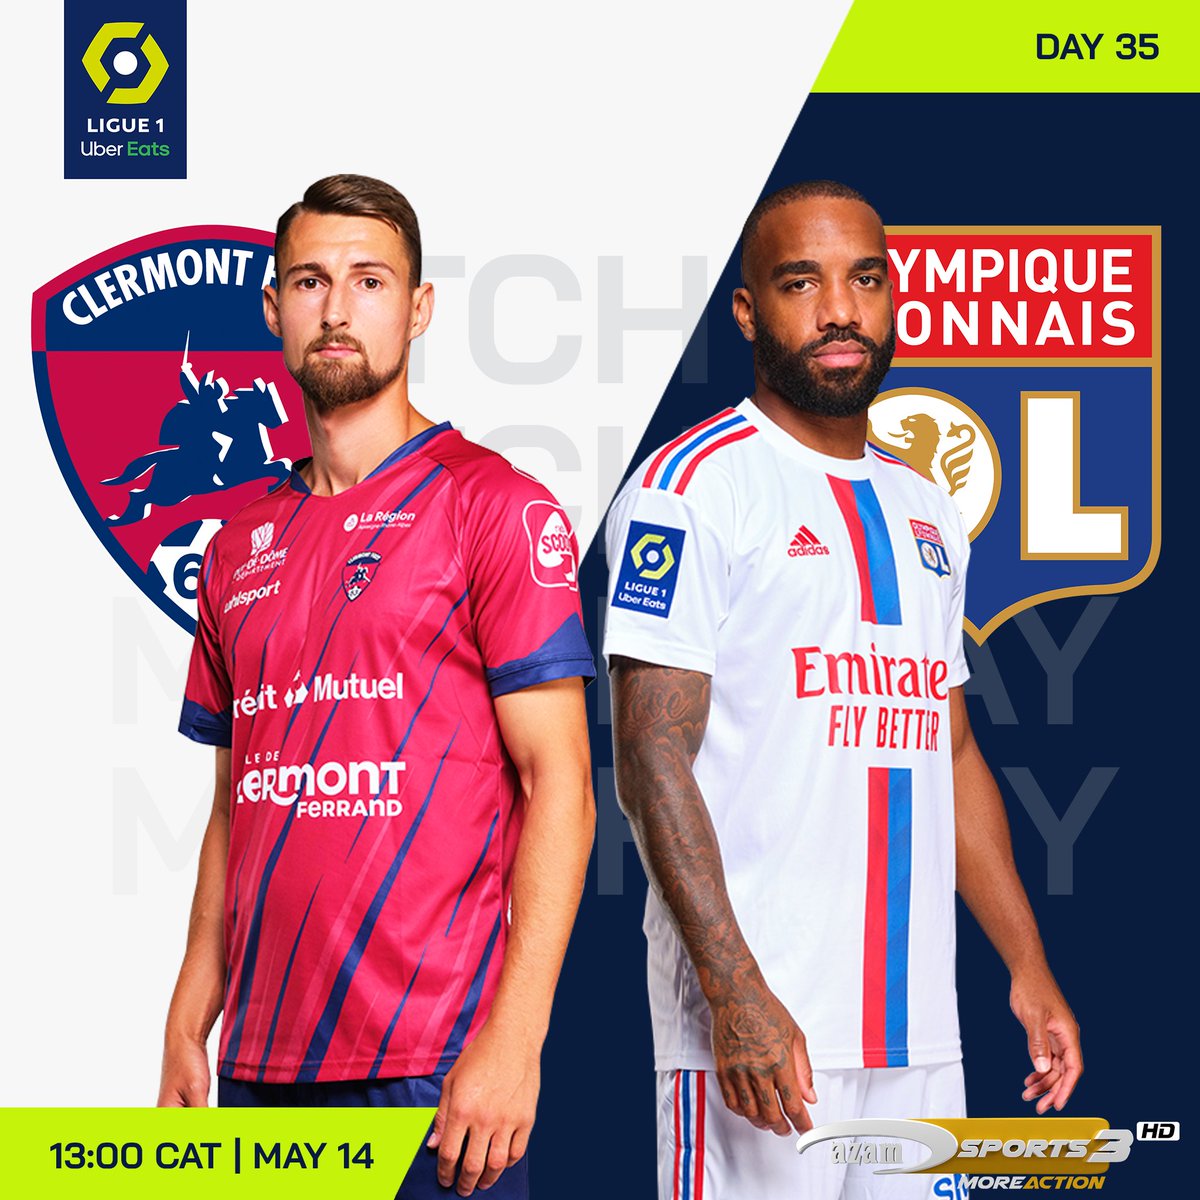 More action on match day 35 of the #FrenchLigue1 its #CLERMONT  vs #LYON (13:00 CAT) on #AzamSports3HD Channel 107 #AzamTV decoder #azamtvzw #entertainmentforeverybody